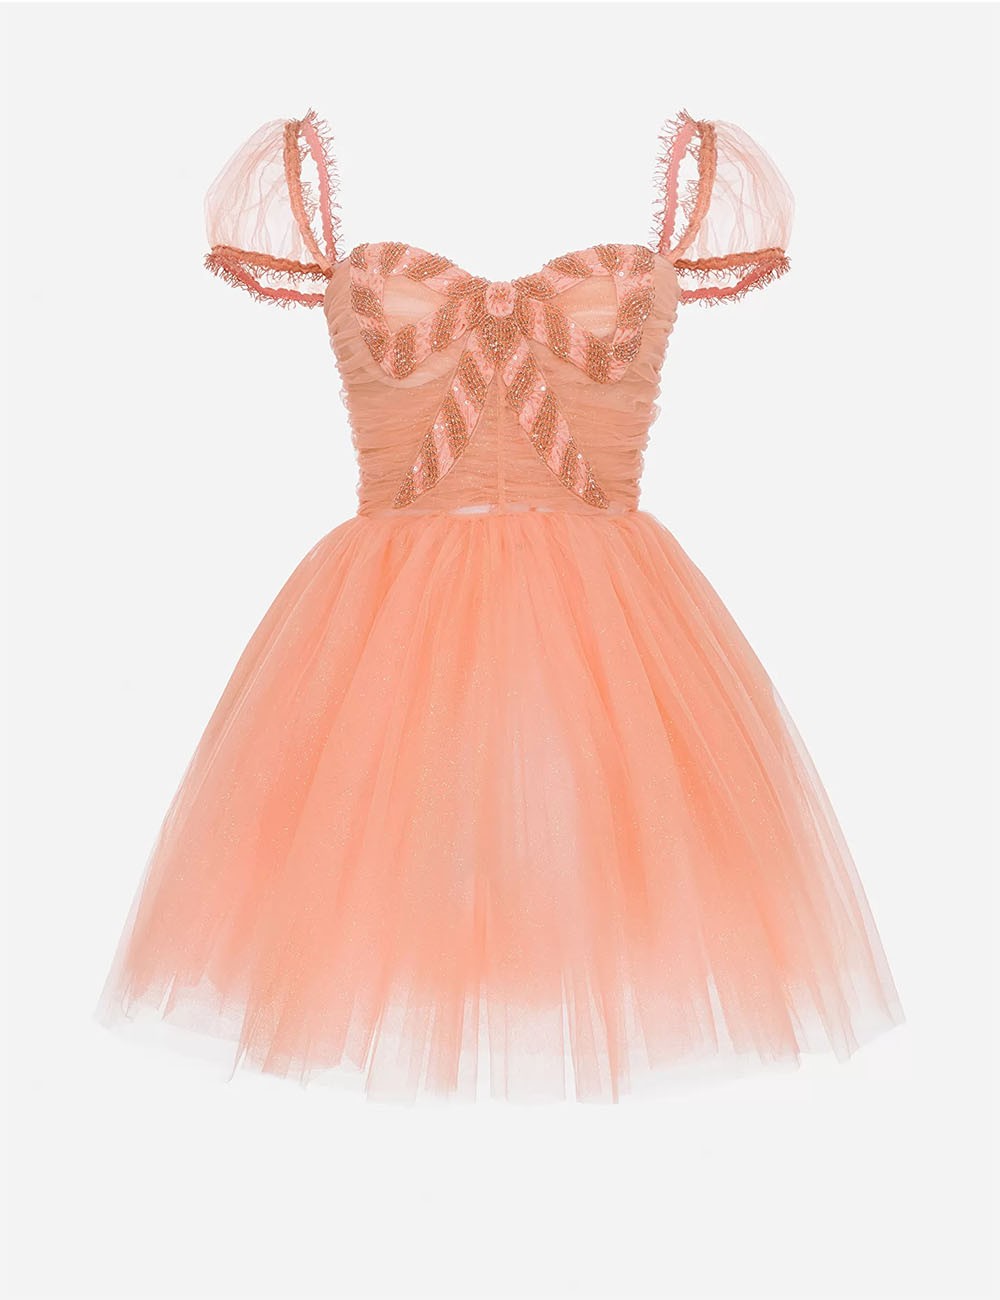 Dolly dress in glittered tulle fabric Coral Pink